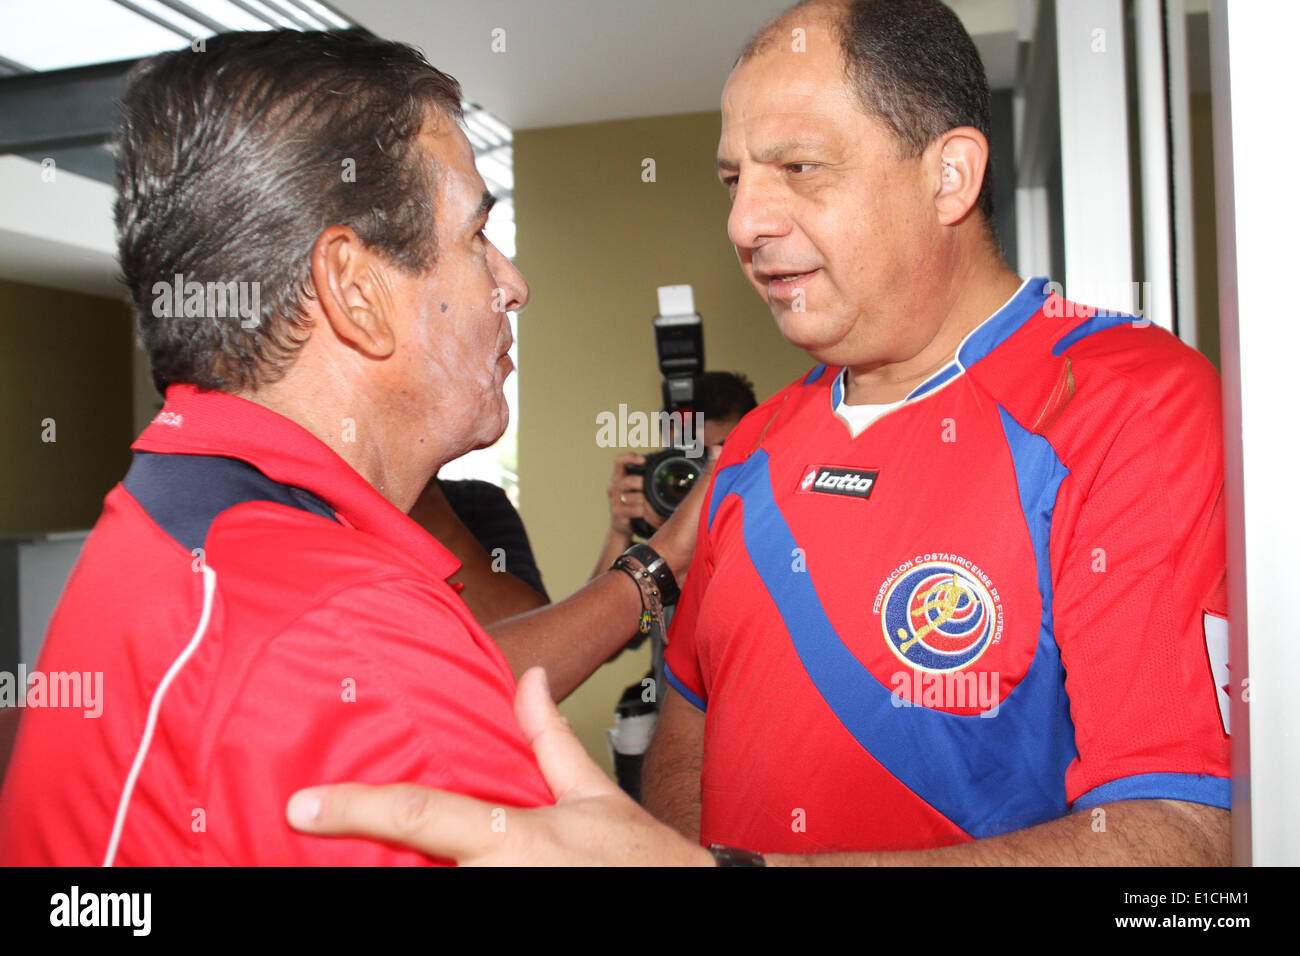 Santa Ana, Costa rica. 30th May, 2014. Head coach Jorge Luis Pinto (L) of Costa Rica's national soccer team greets Costa Rica's President Luis Guillermo Solis during a training session of the team before the upcoming Brazil 2014 FIFA World Cup in Santa Ana, west of San Jose, capital of Costa rica, on May 30, 2014. © Kent Gilbert/Xinhua/Alamy Live News Stock Photo